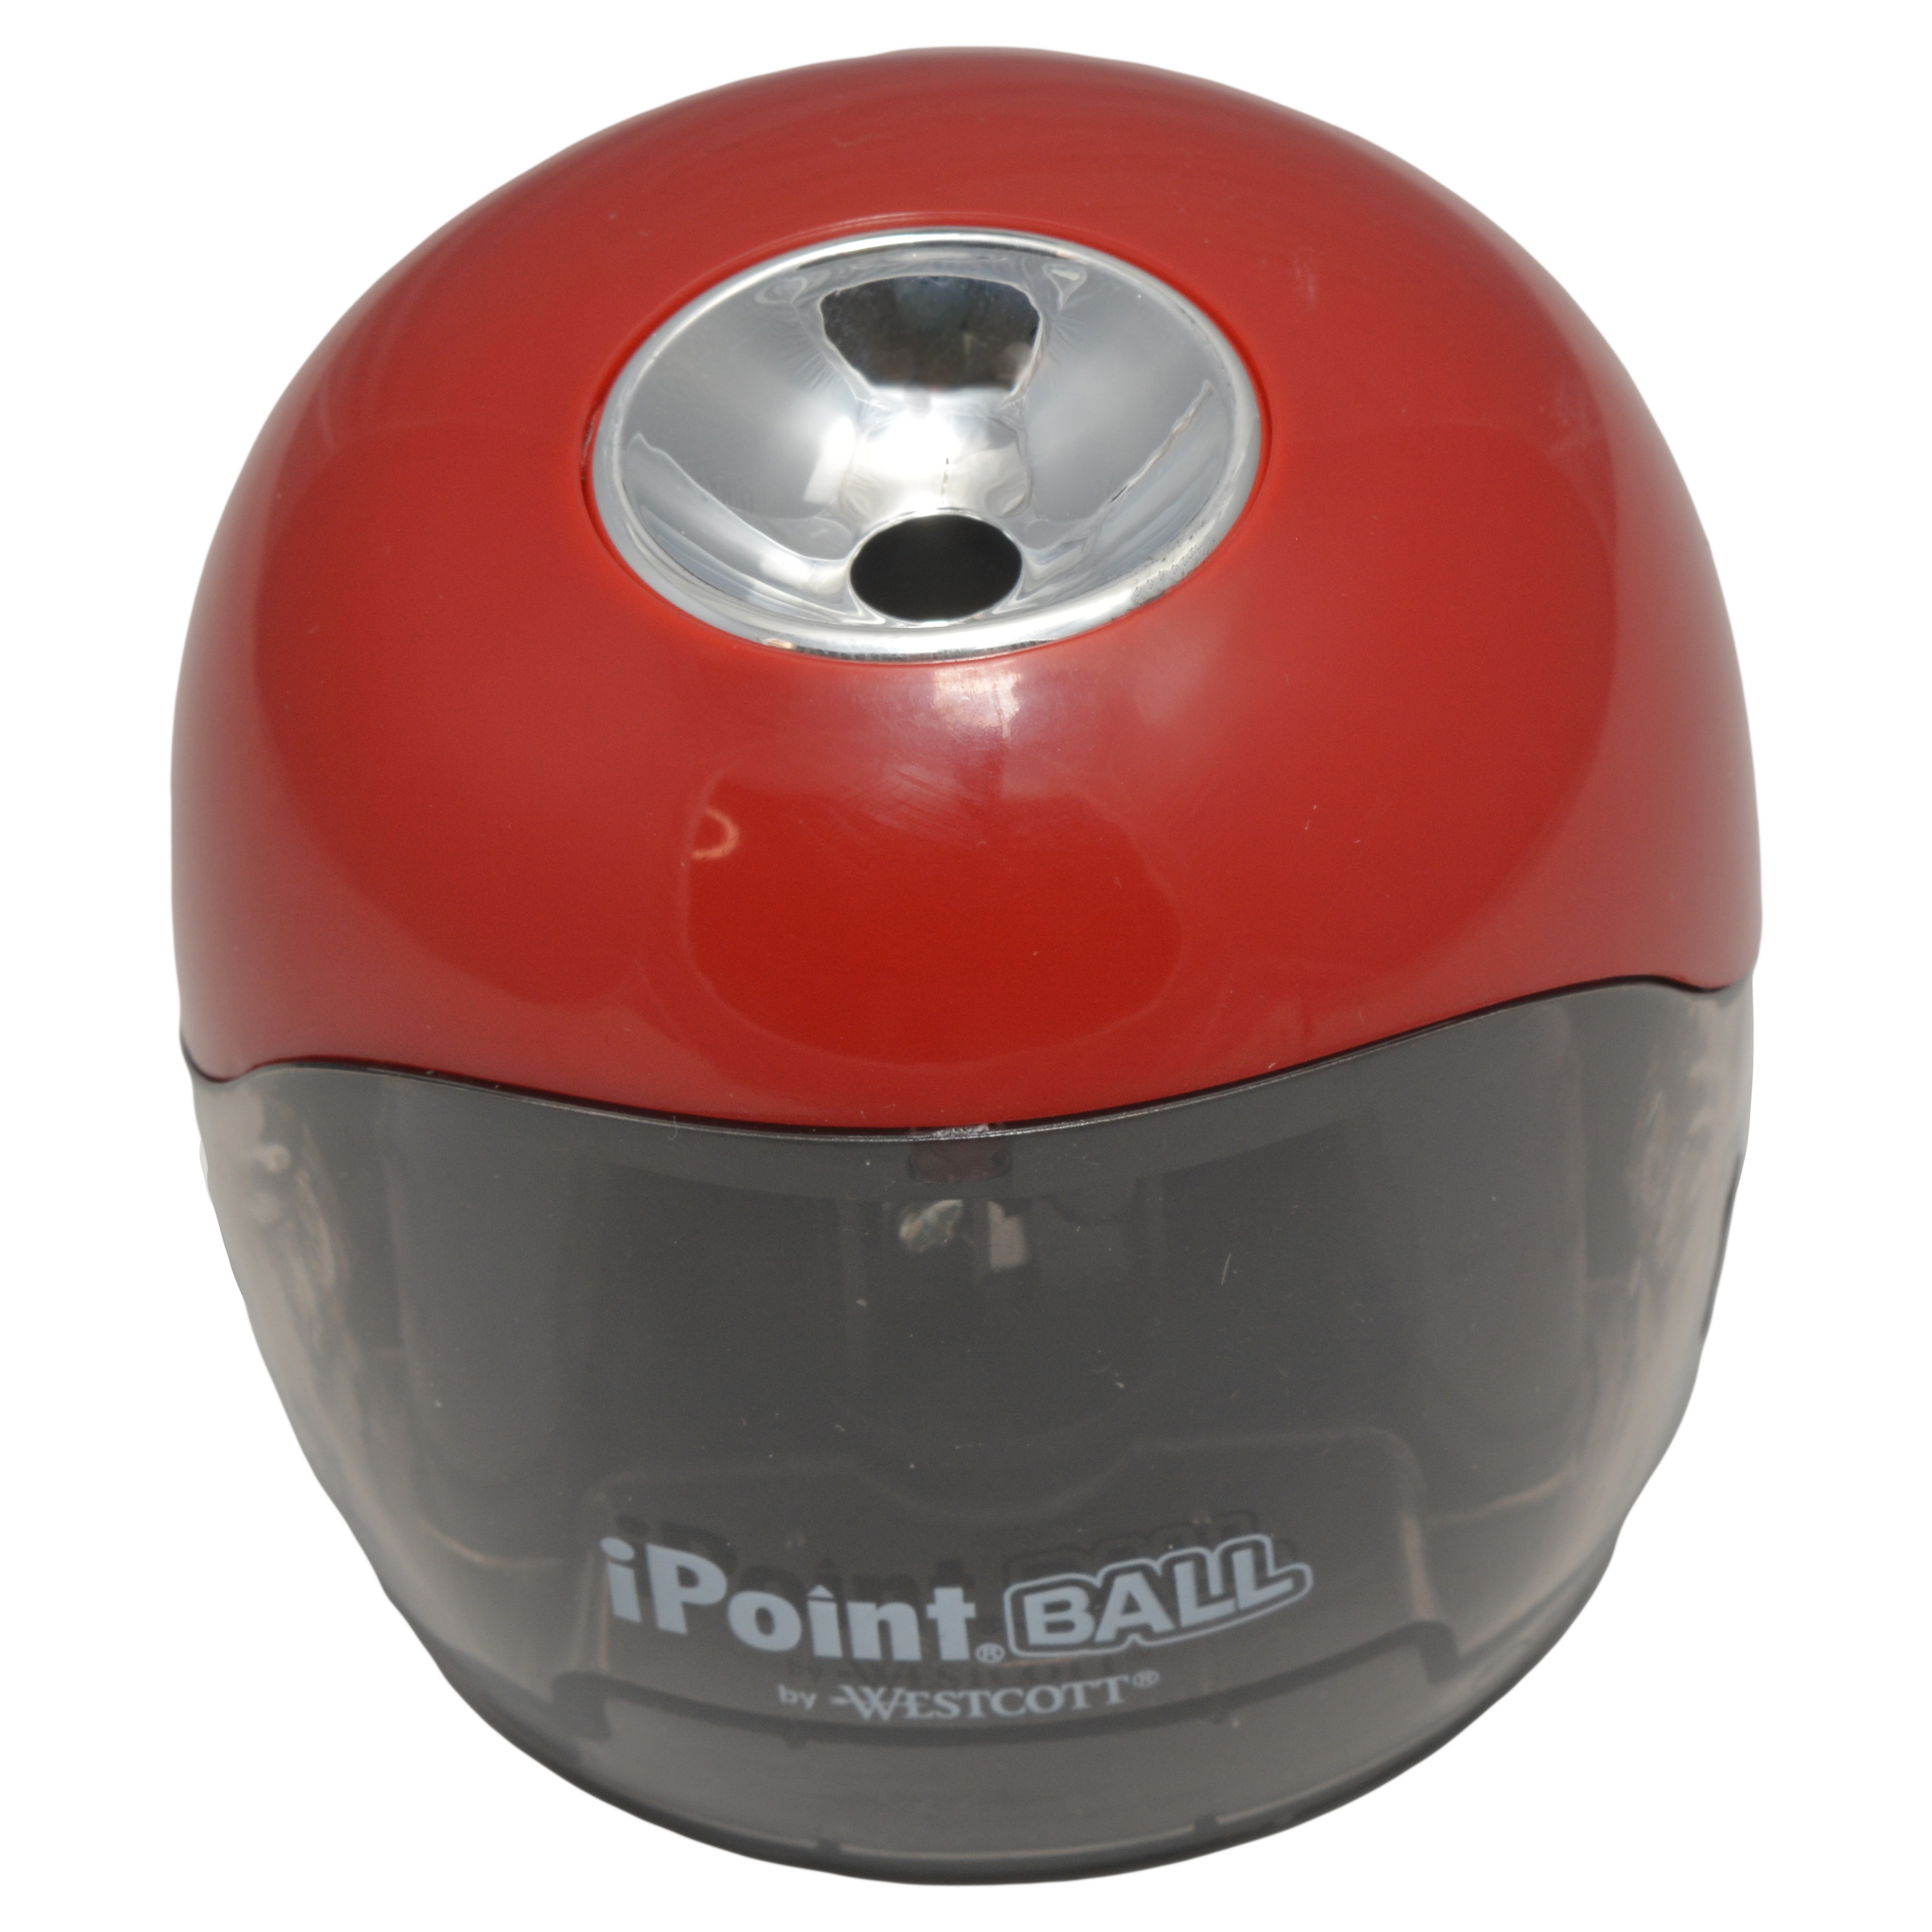 Westcott Ipoint Ball Battery Pencil Sharpener, Anti-Microbial